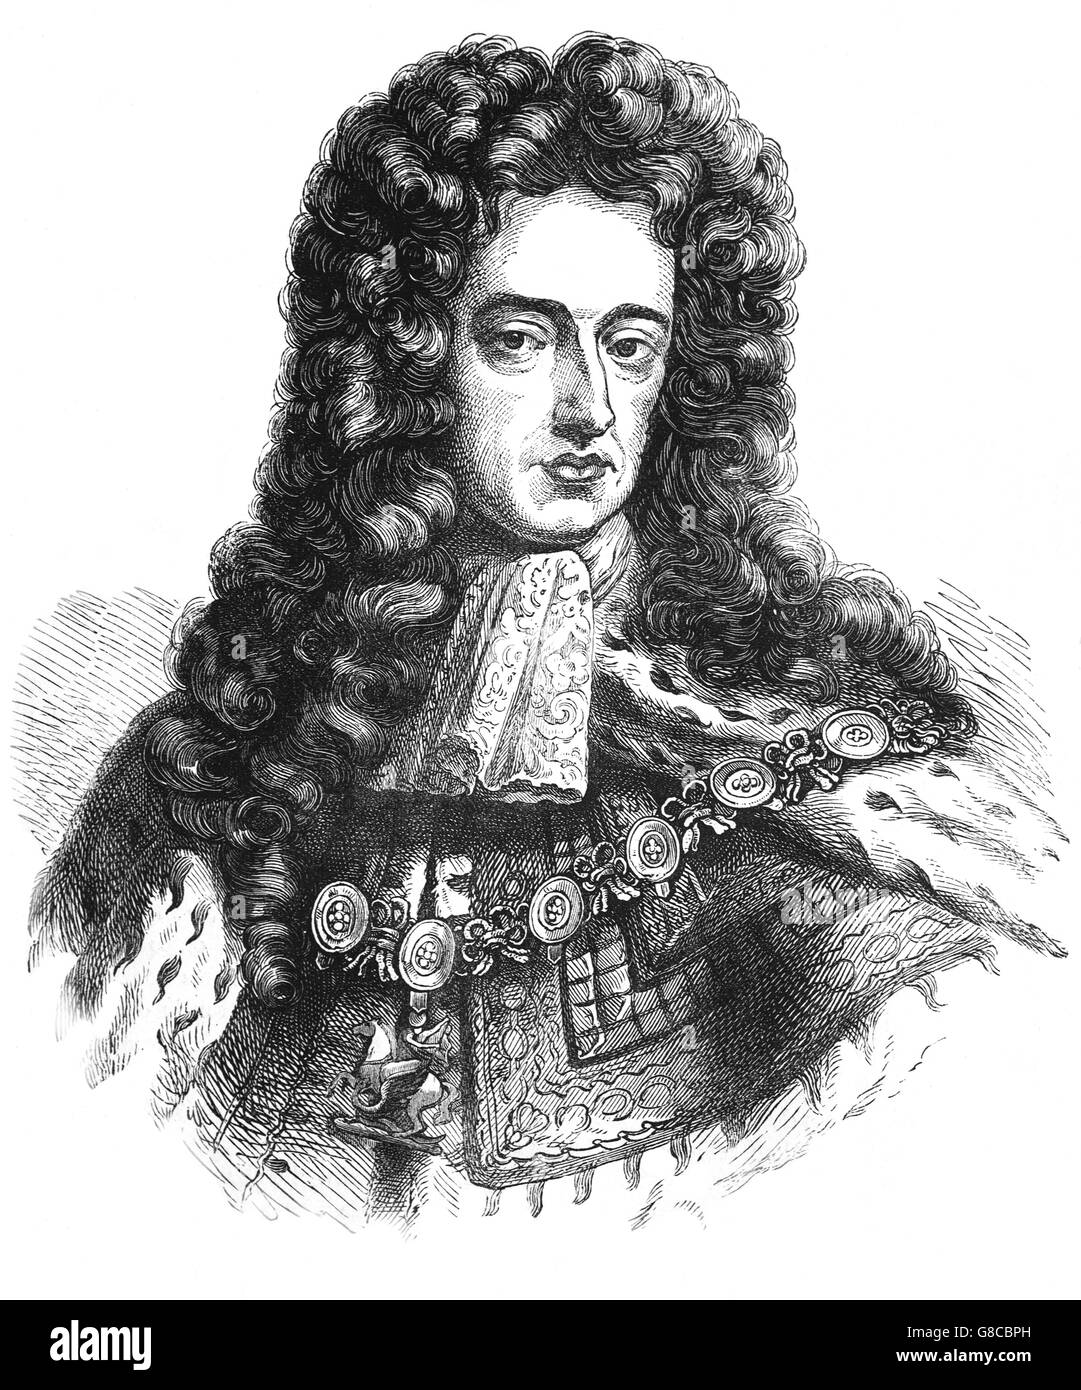 William III (1650 – 1702), King of England, Ireland, and Scotland from 1689 until his death. As King of Scotland, he is known as William II, and informally known by sections of the population in Northern Ireland and Scotland as 'King Billy'. Stock Photo